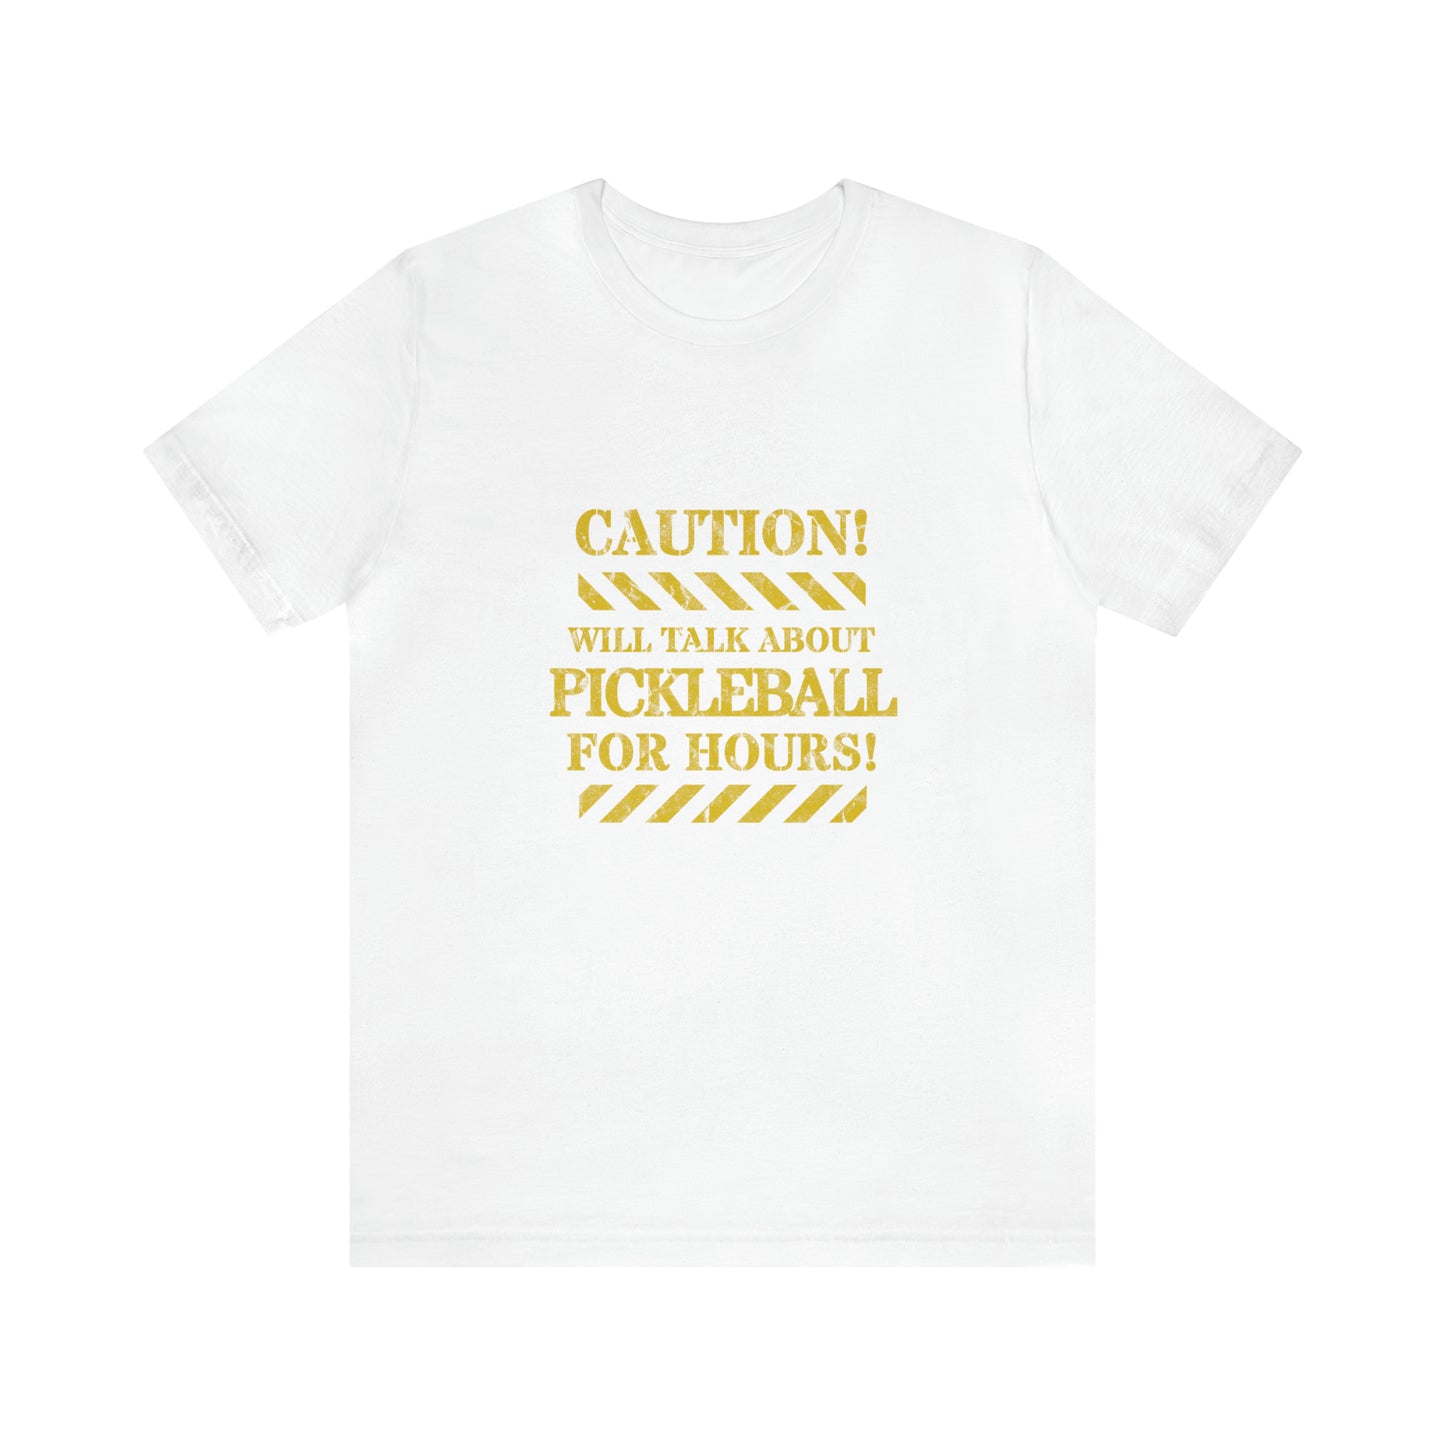 Caution, Will Talk About Pickleball For Hours T-Shirt